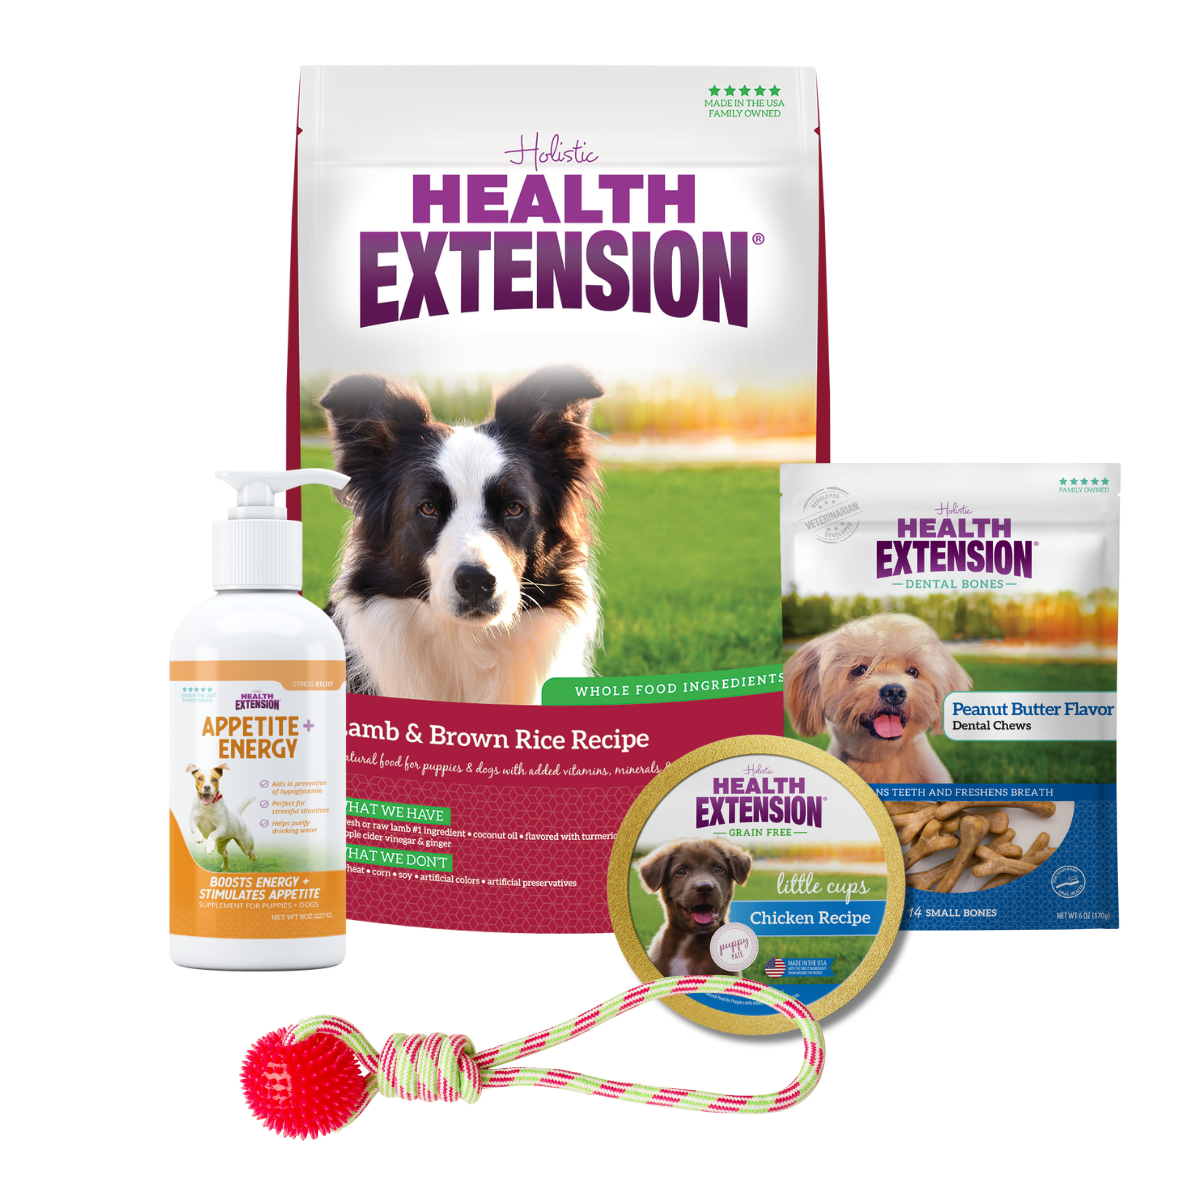 Complete Puppy Bundle: Health Extension Lamb & Brown Rice Recipe Dry Dog Food and variety of other dog products, including food, treats, toys, and supplements.